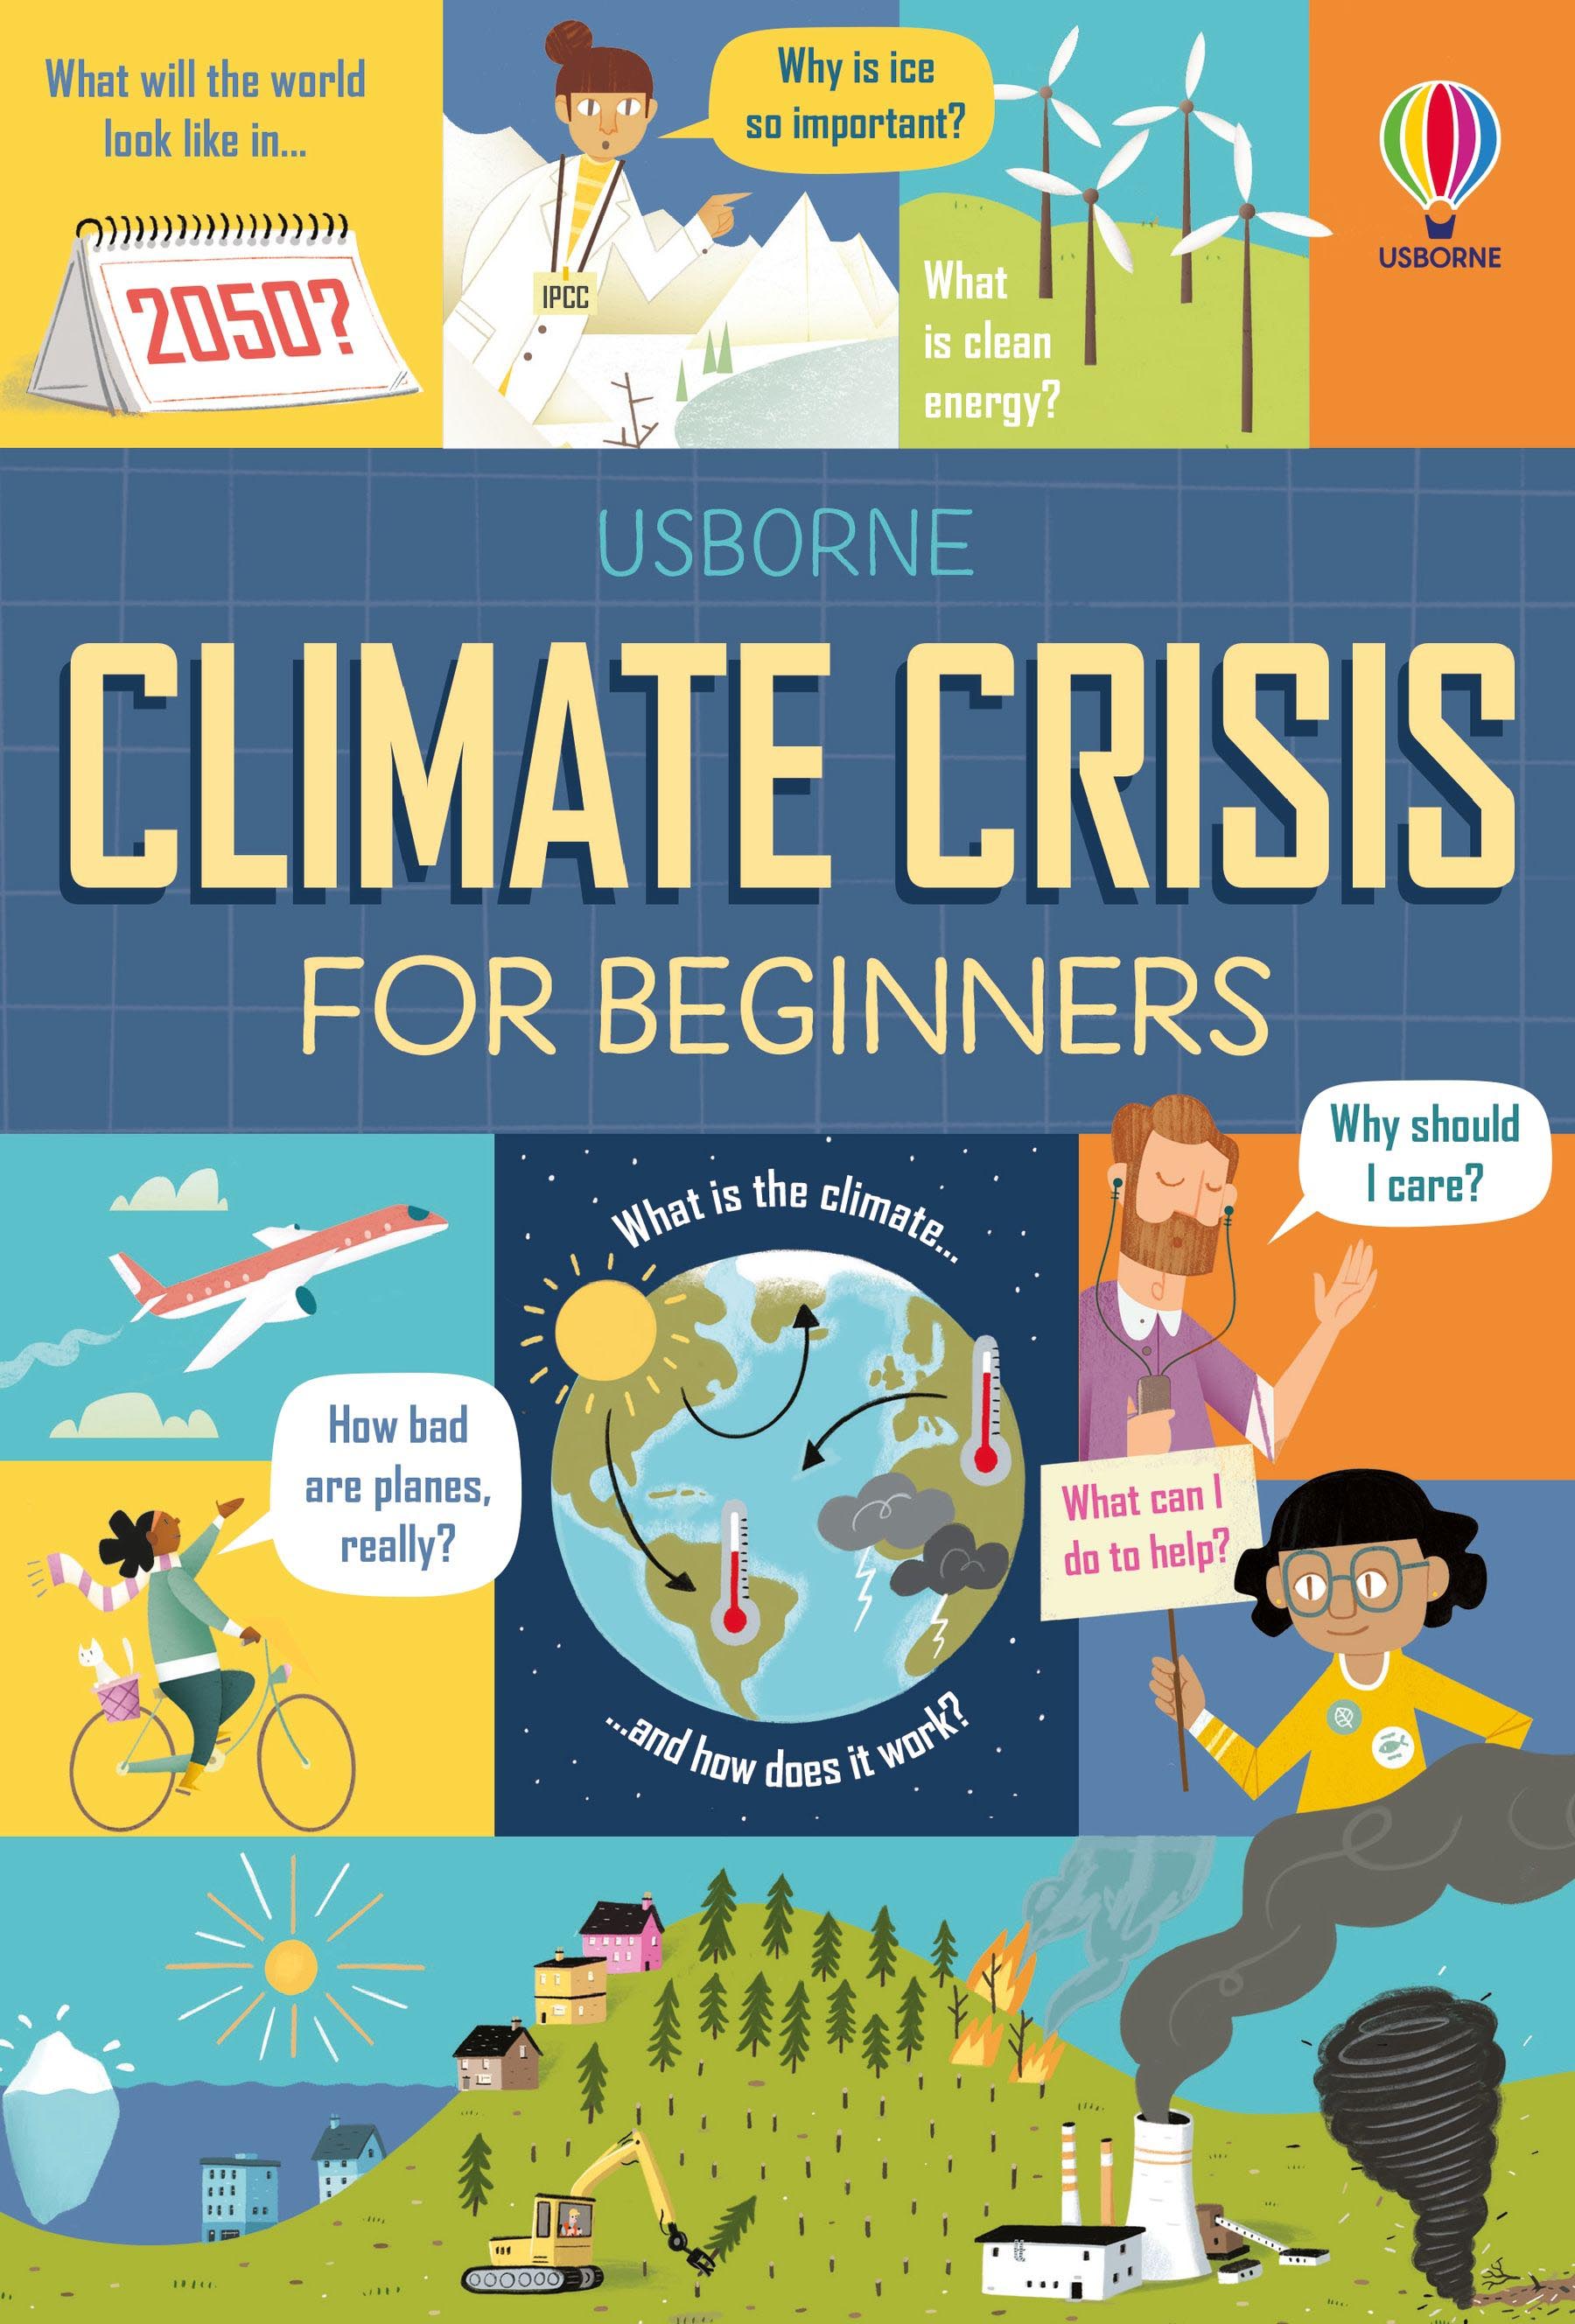 Usborne Climate Crisis for Beginners